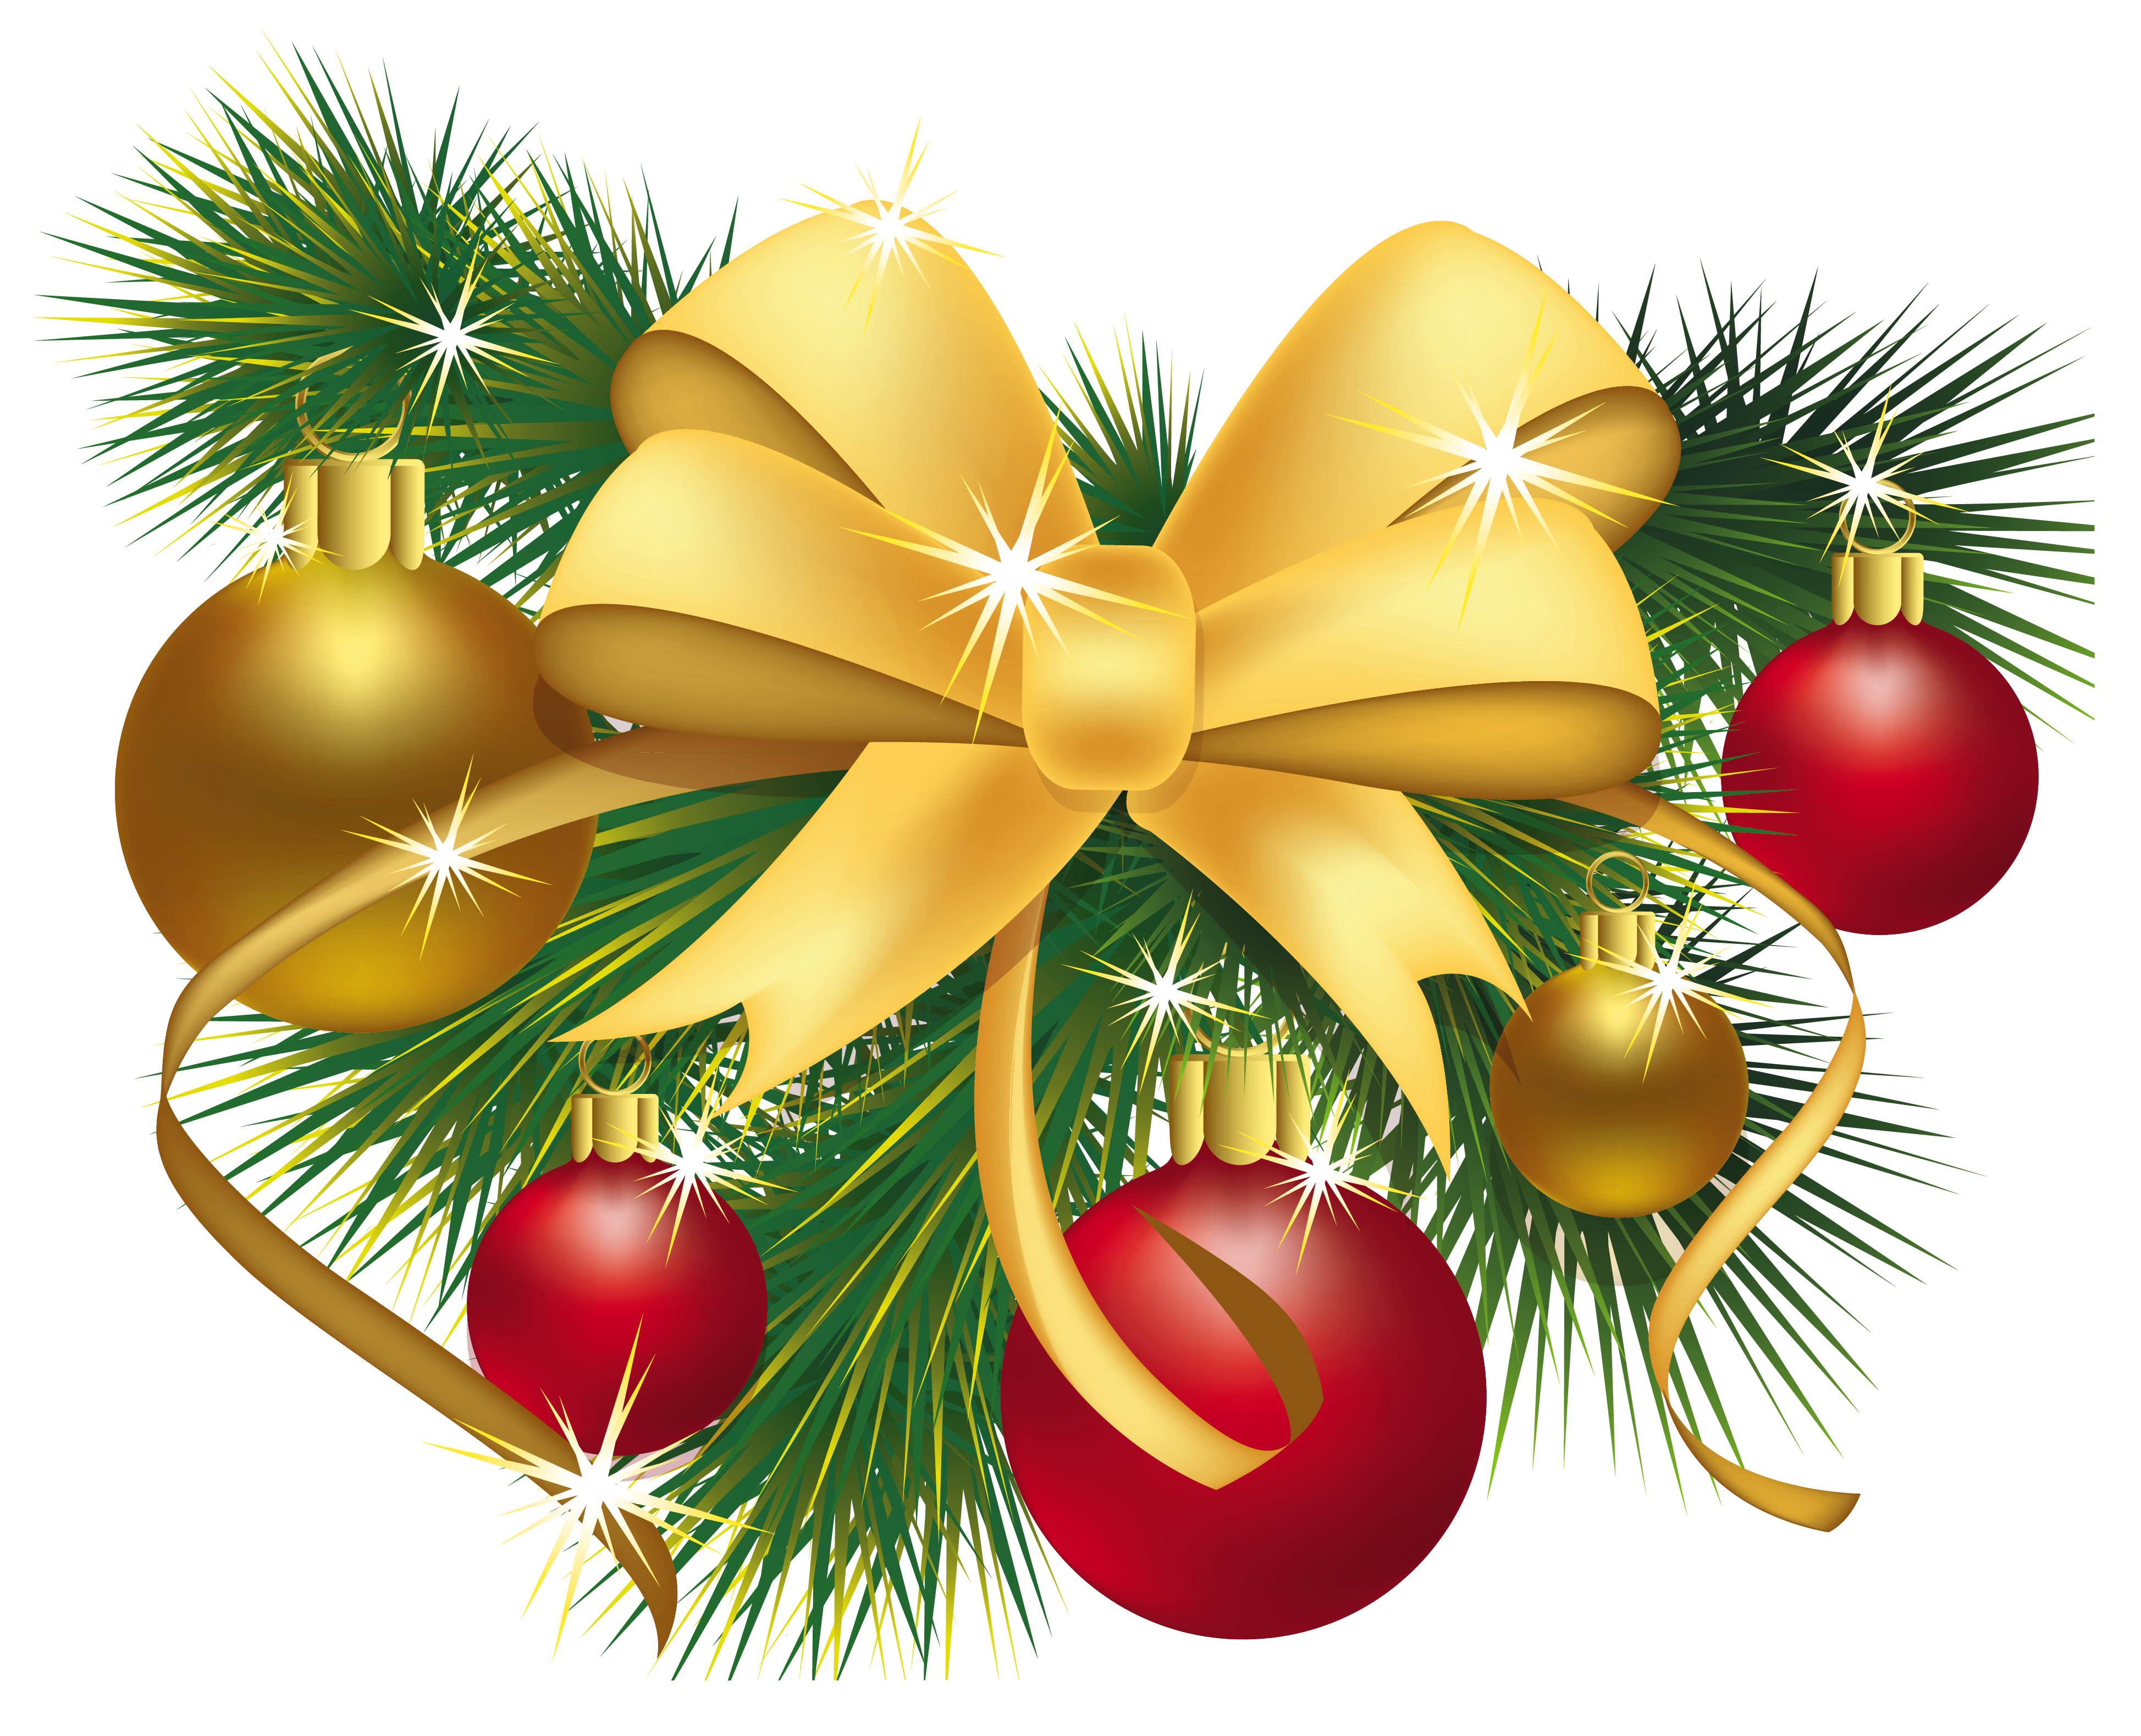 Transparent decoration picture gallery. Christmas png files